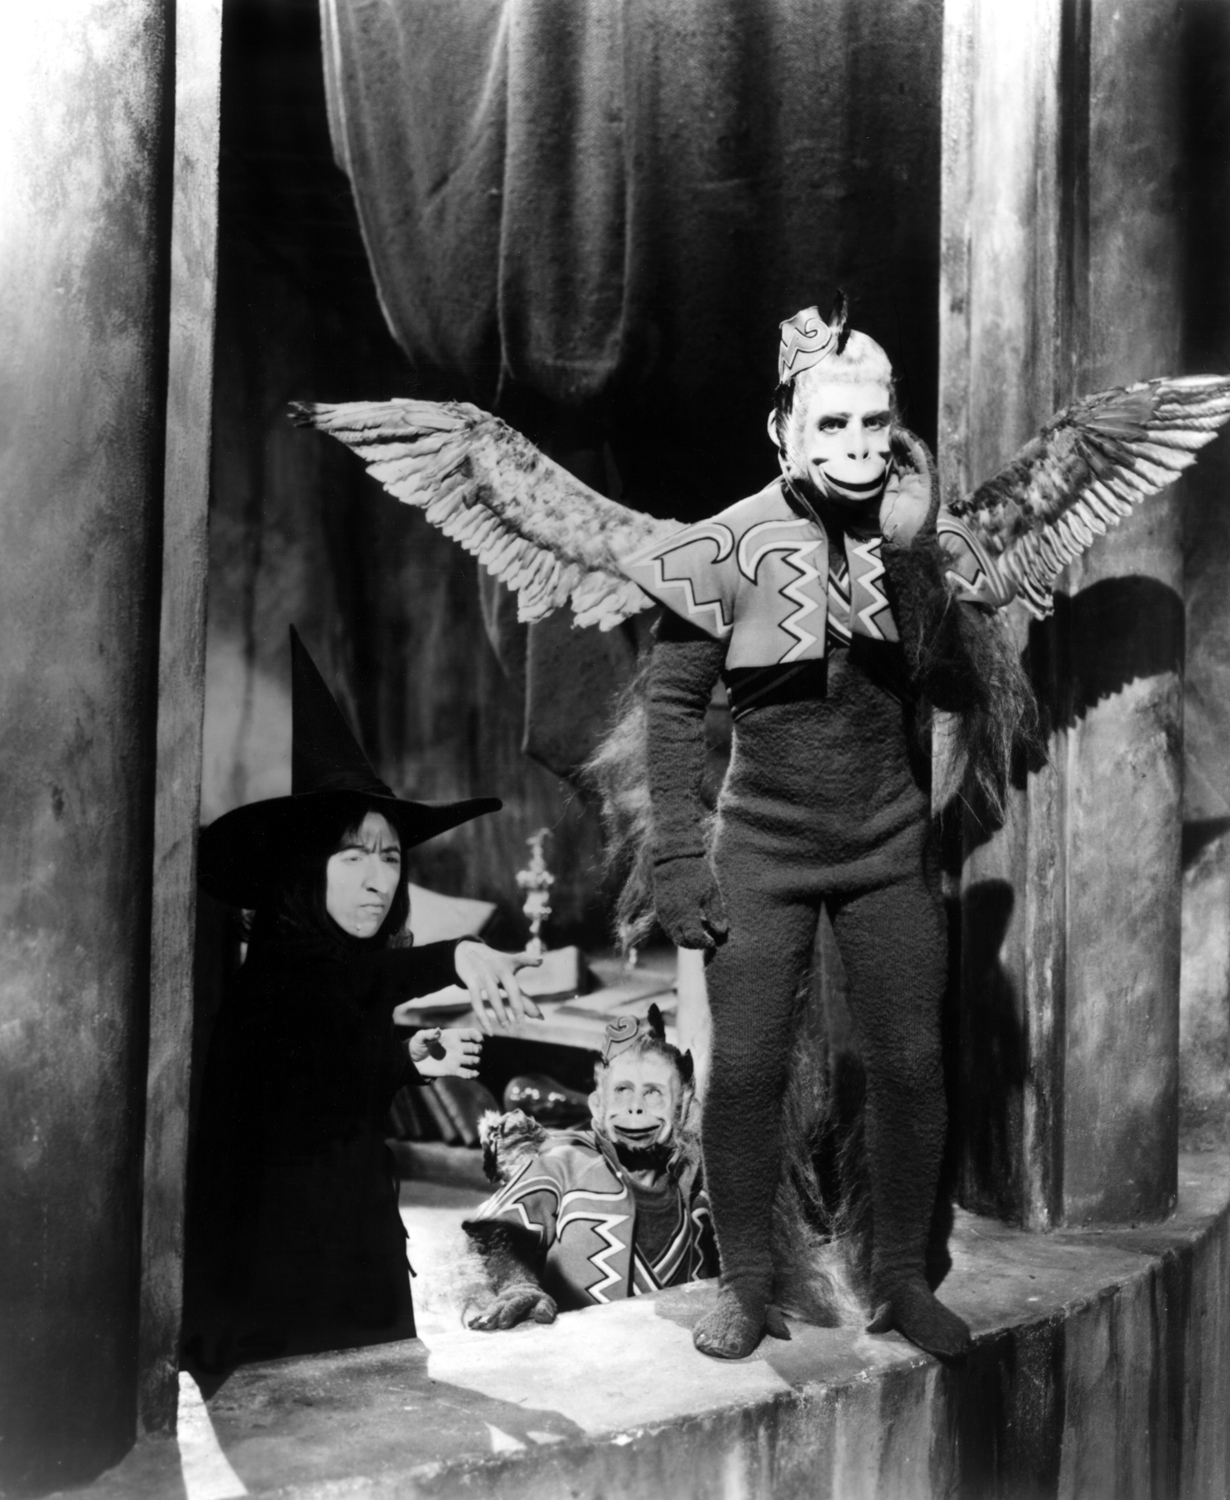 Wizard of nightmares: Five traumatizing moments from 'Wizard of Oz